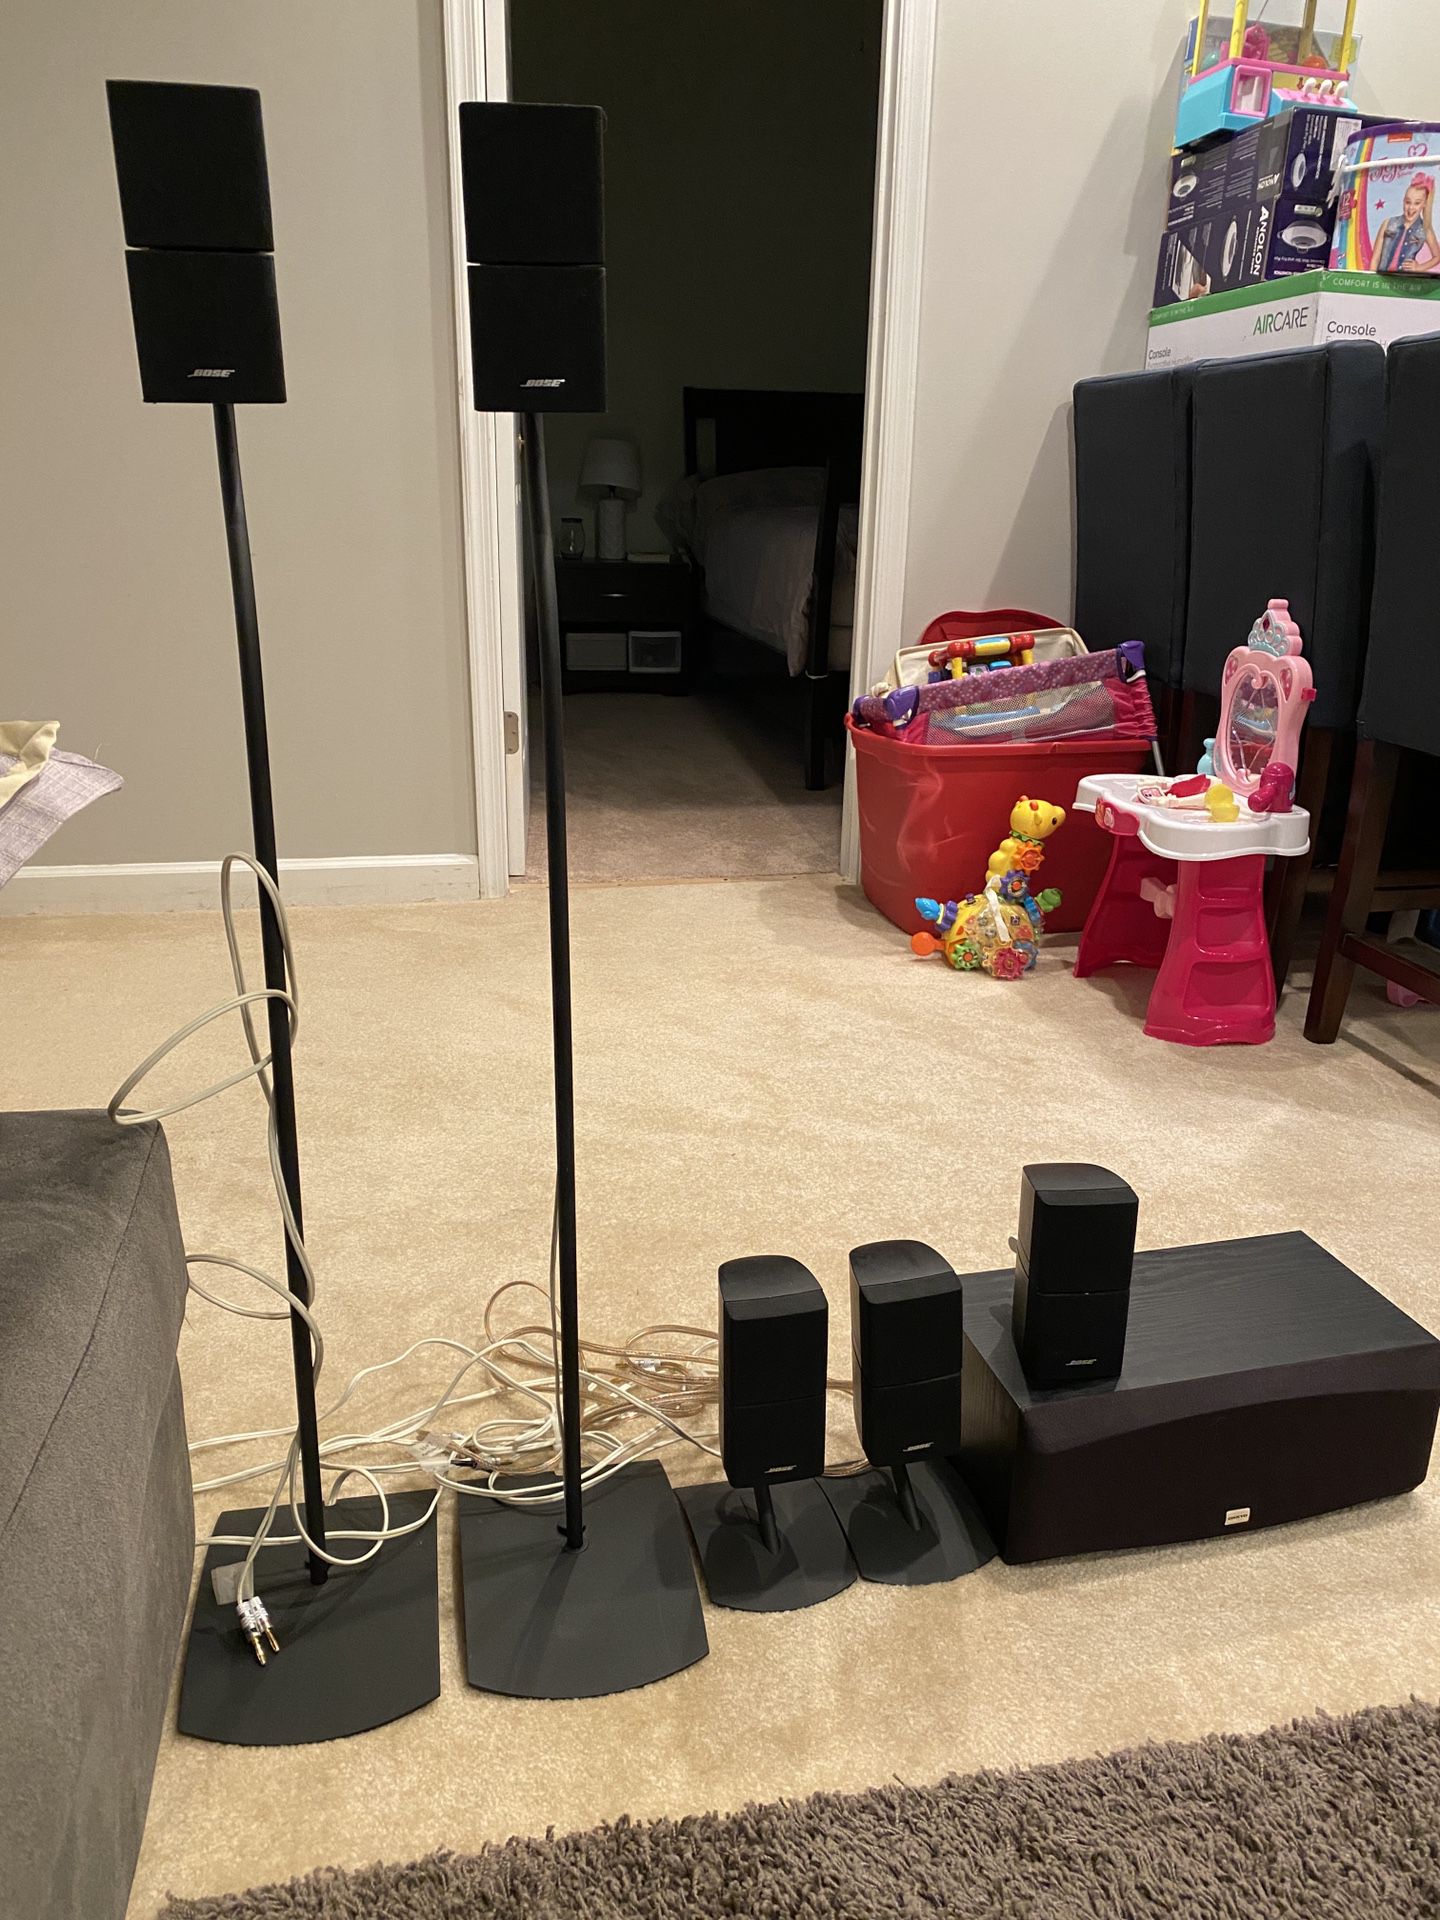 5 x Bose Double Cube speakers acoustimass Lifestyle with 4 stands (2 long + 2 short) and an Onkyo 100w center channel